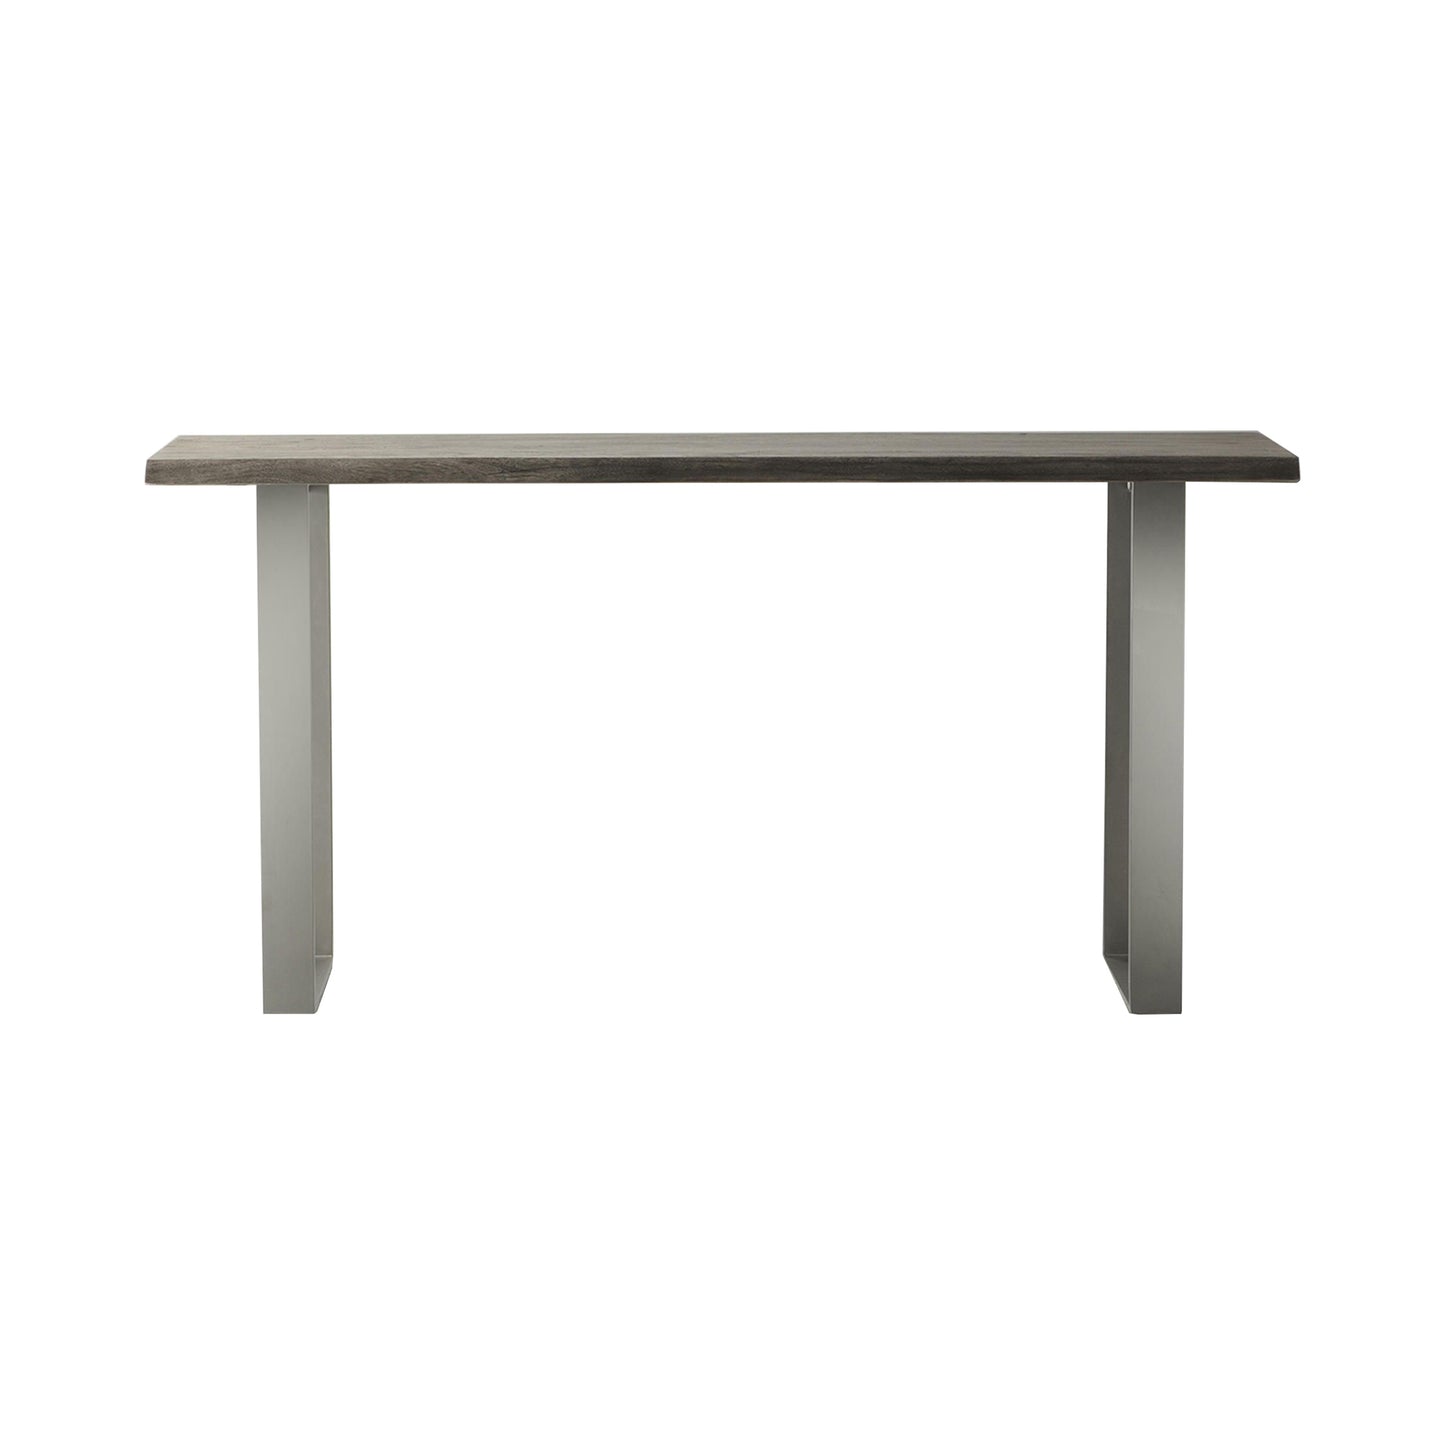 A Southpool Console Table 1600x360x800mm with metal legs and a wooden top, sold by an interior decor retailer.